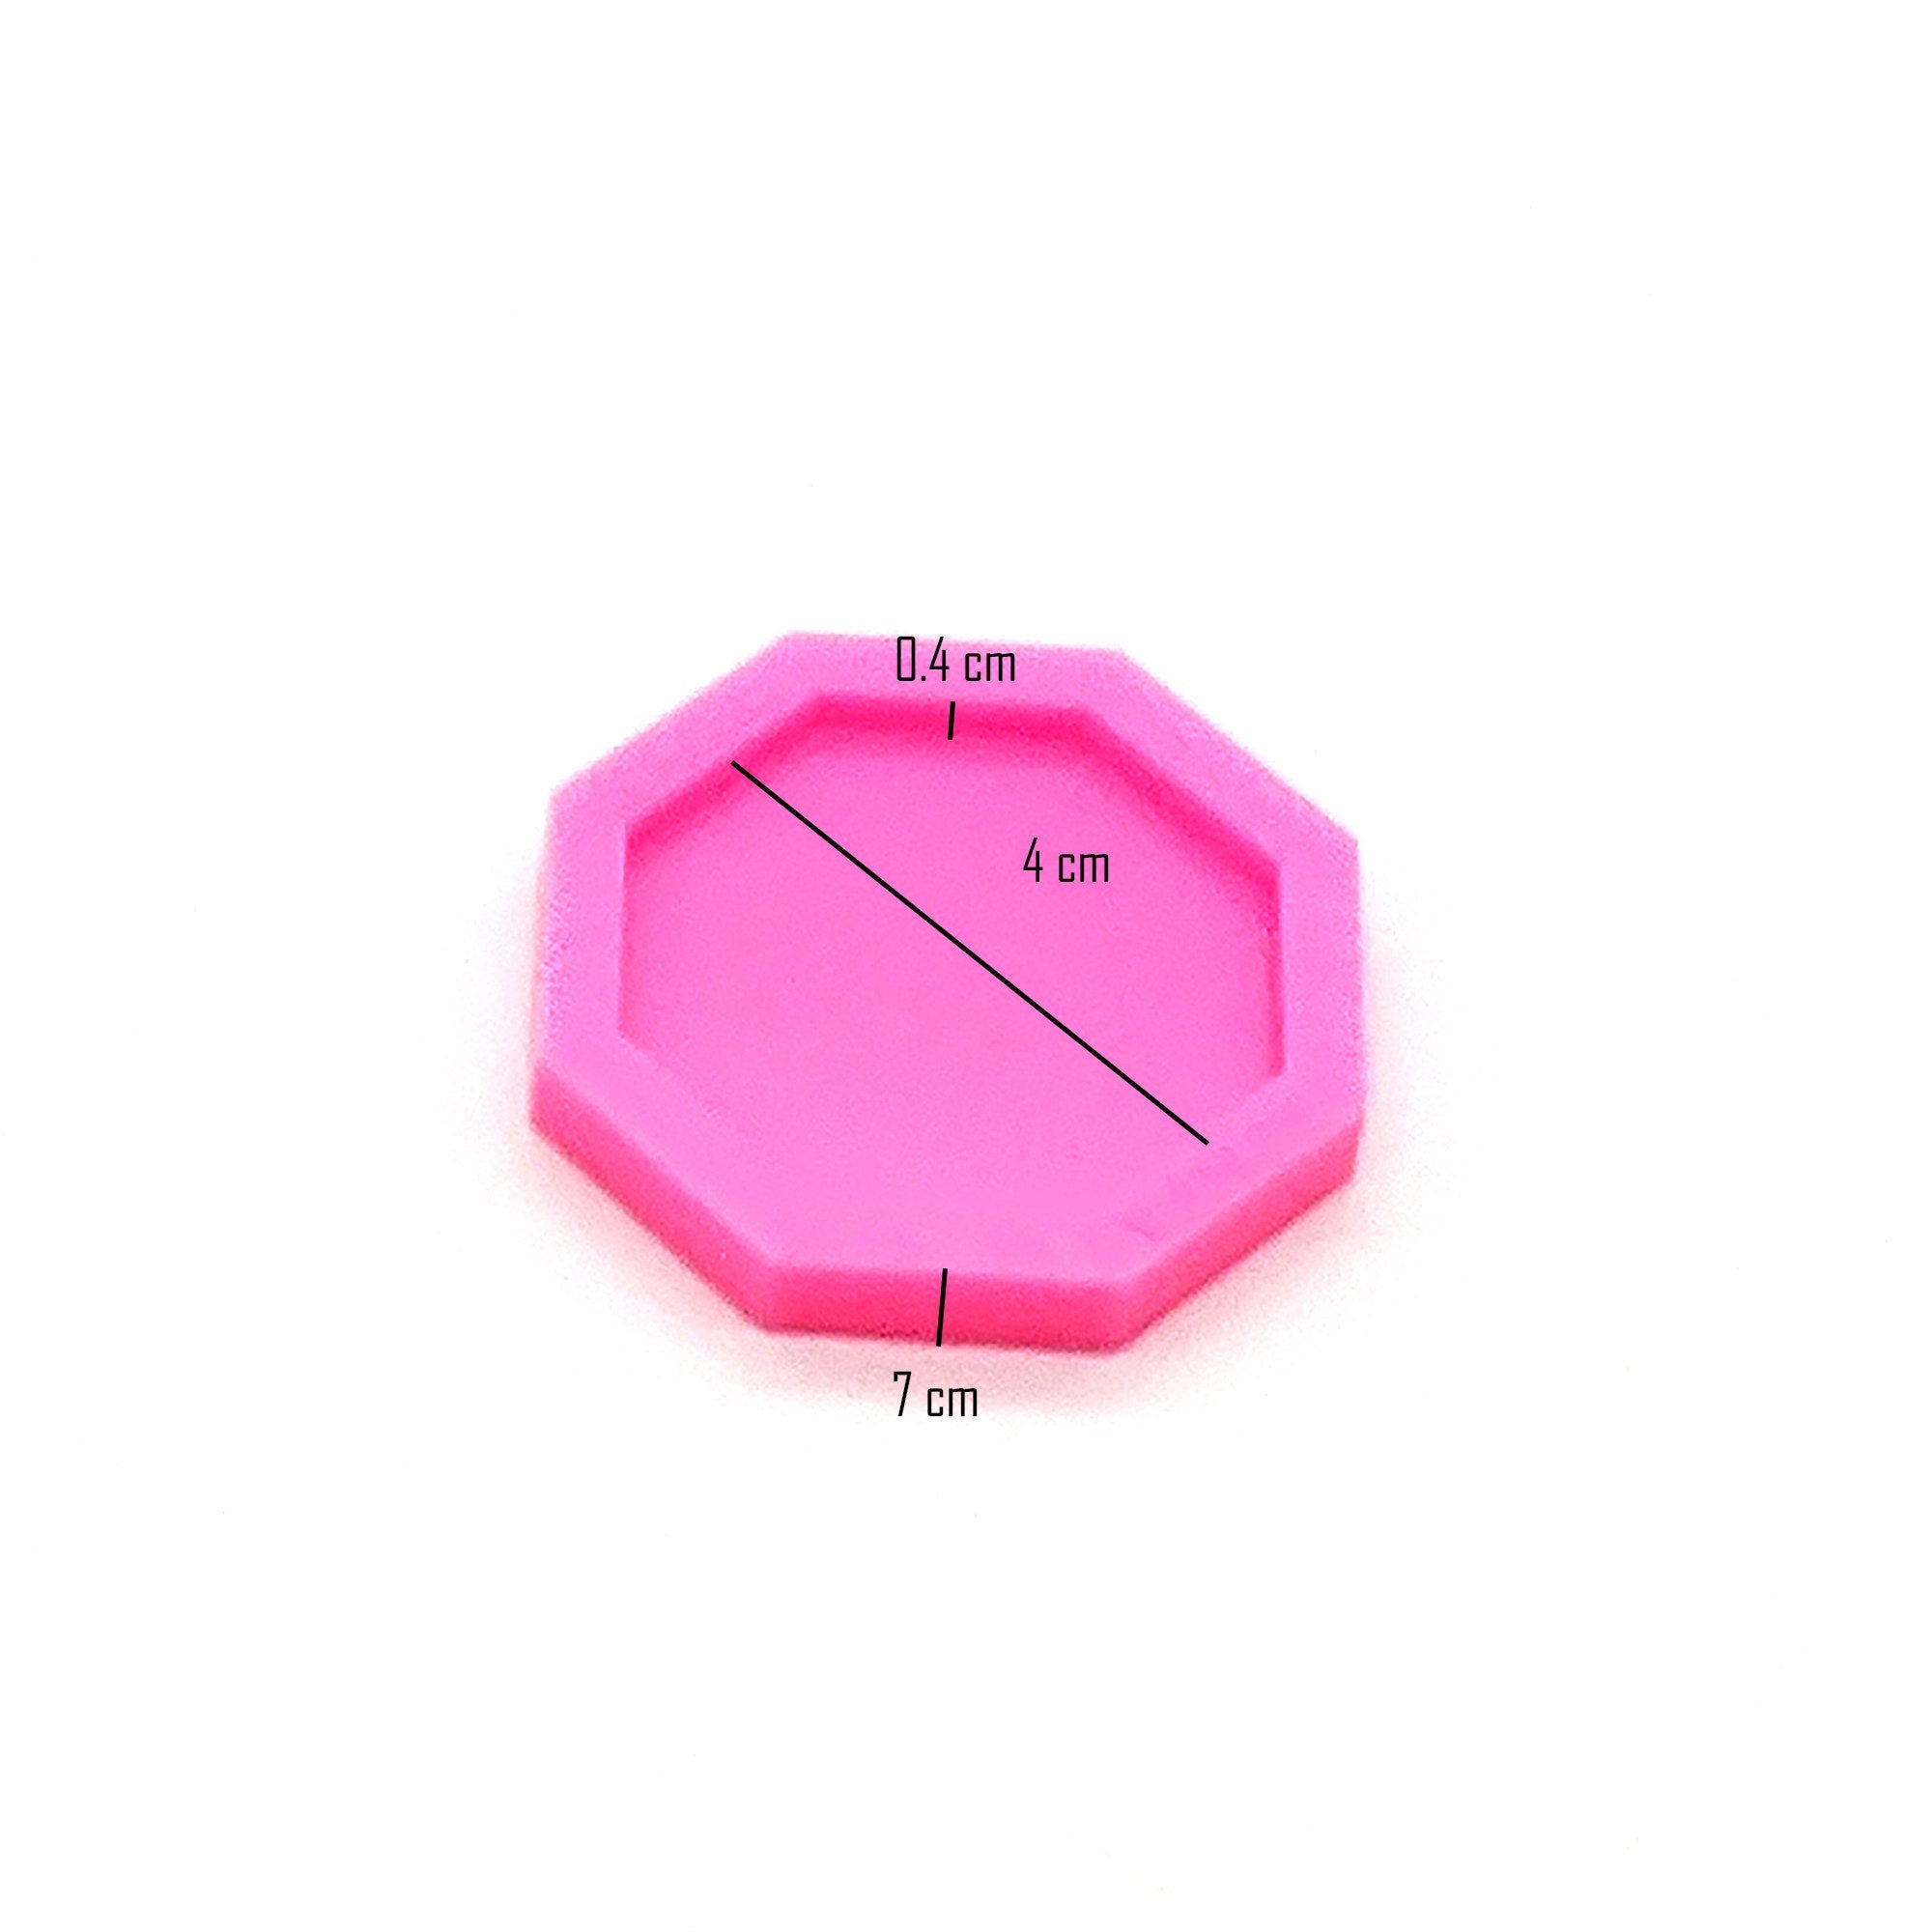 Octagon Phone Grip Shiny Silicone Mold